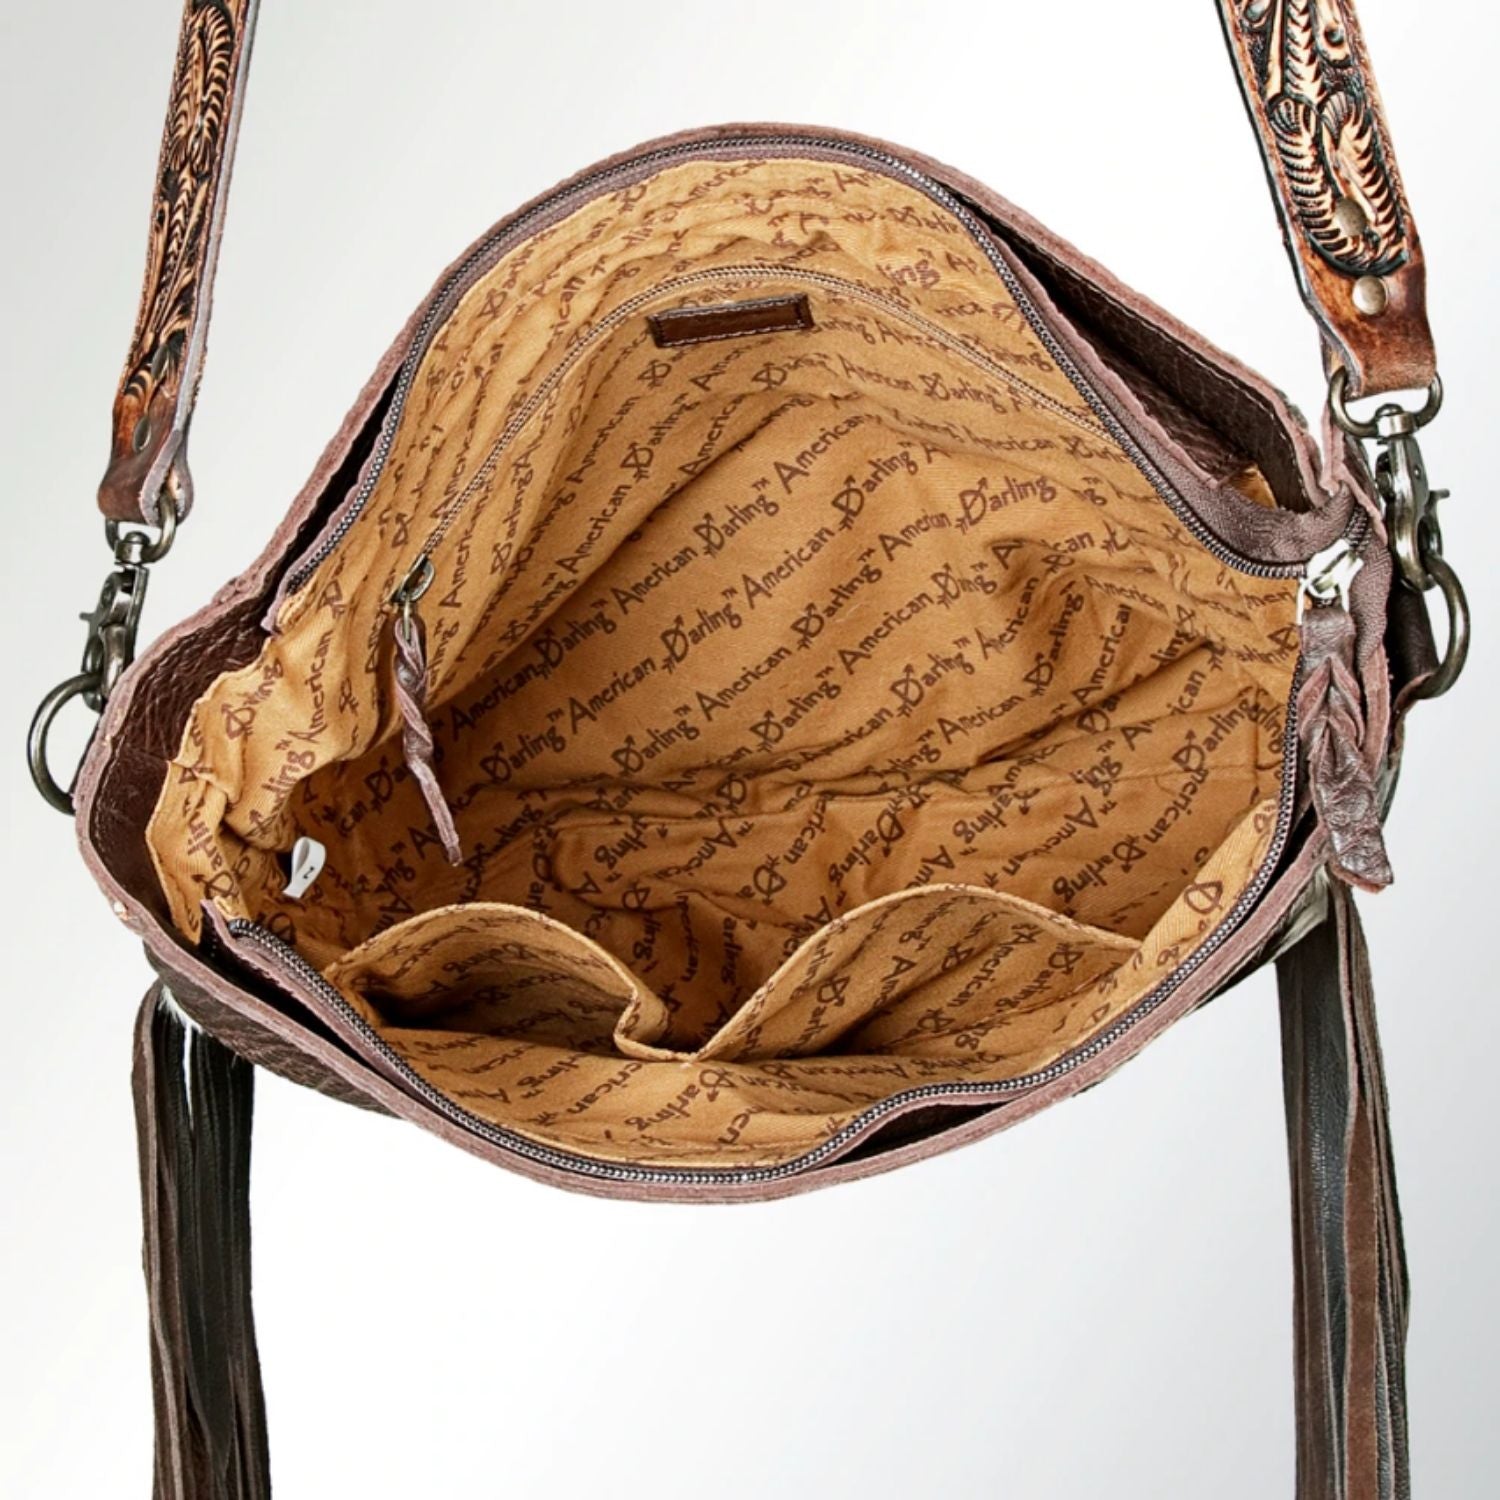 American Darling Stamped Tooled Leather Cheetah Bag – Southern